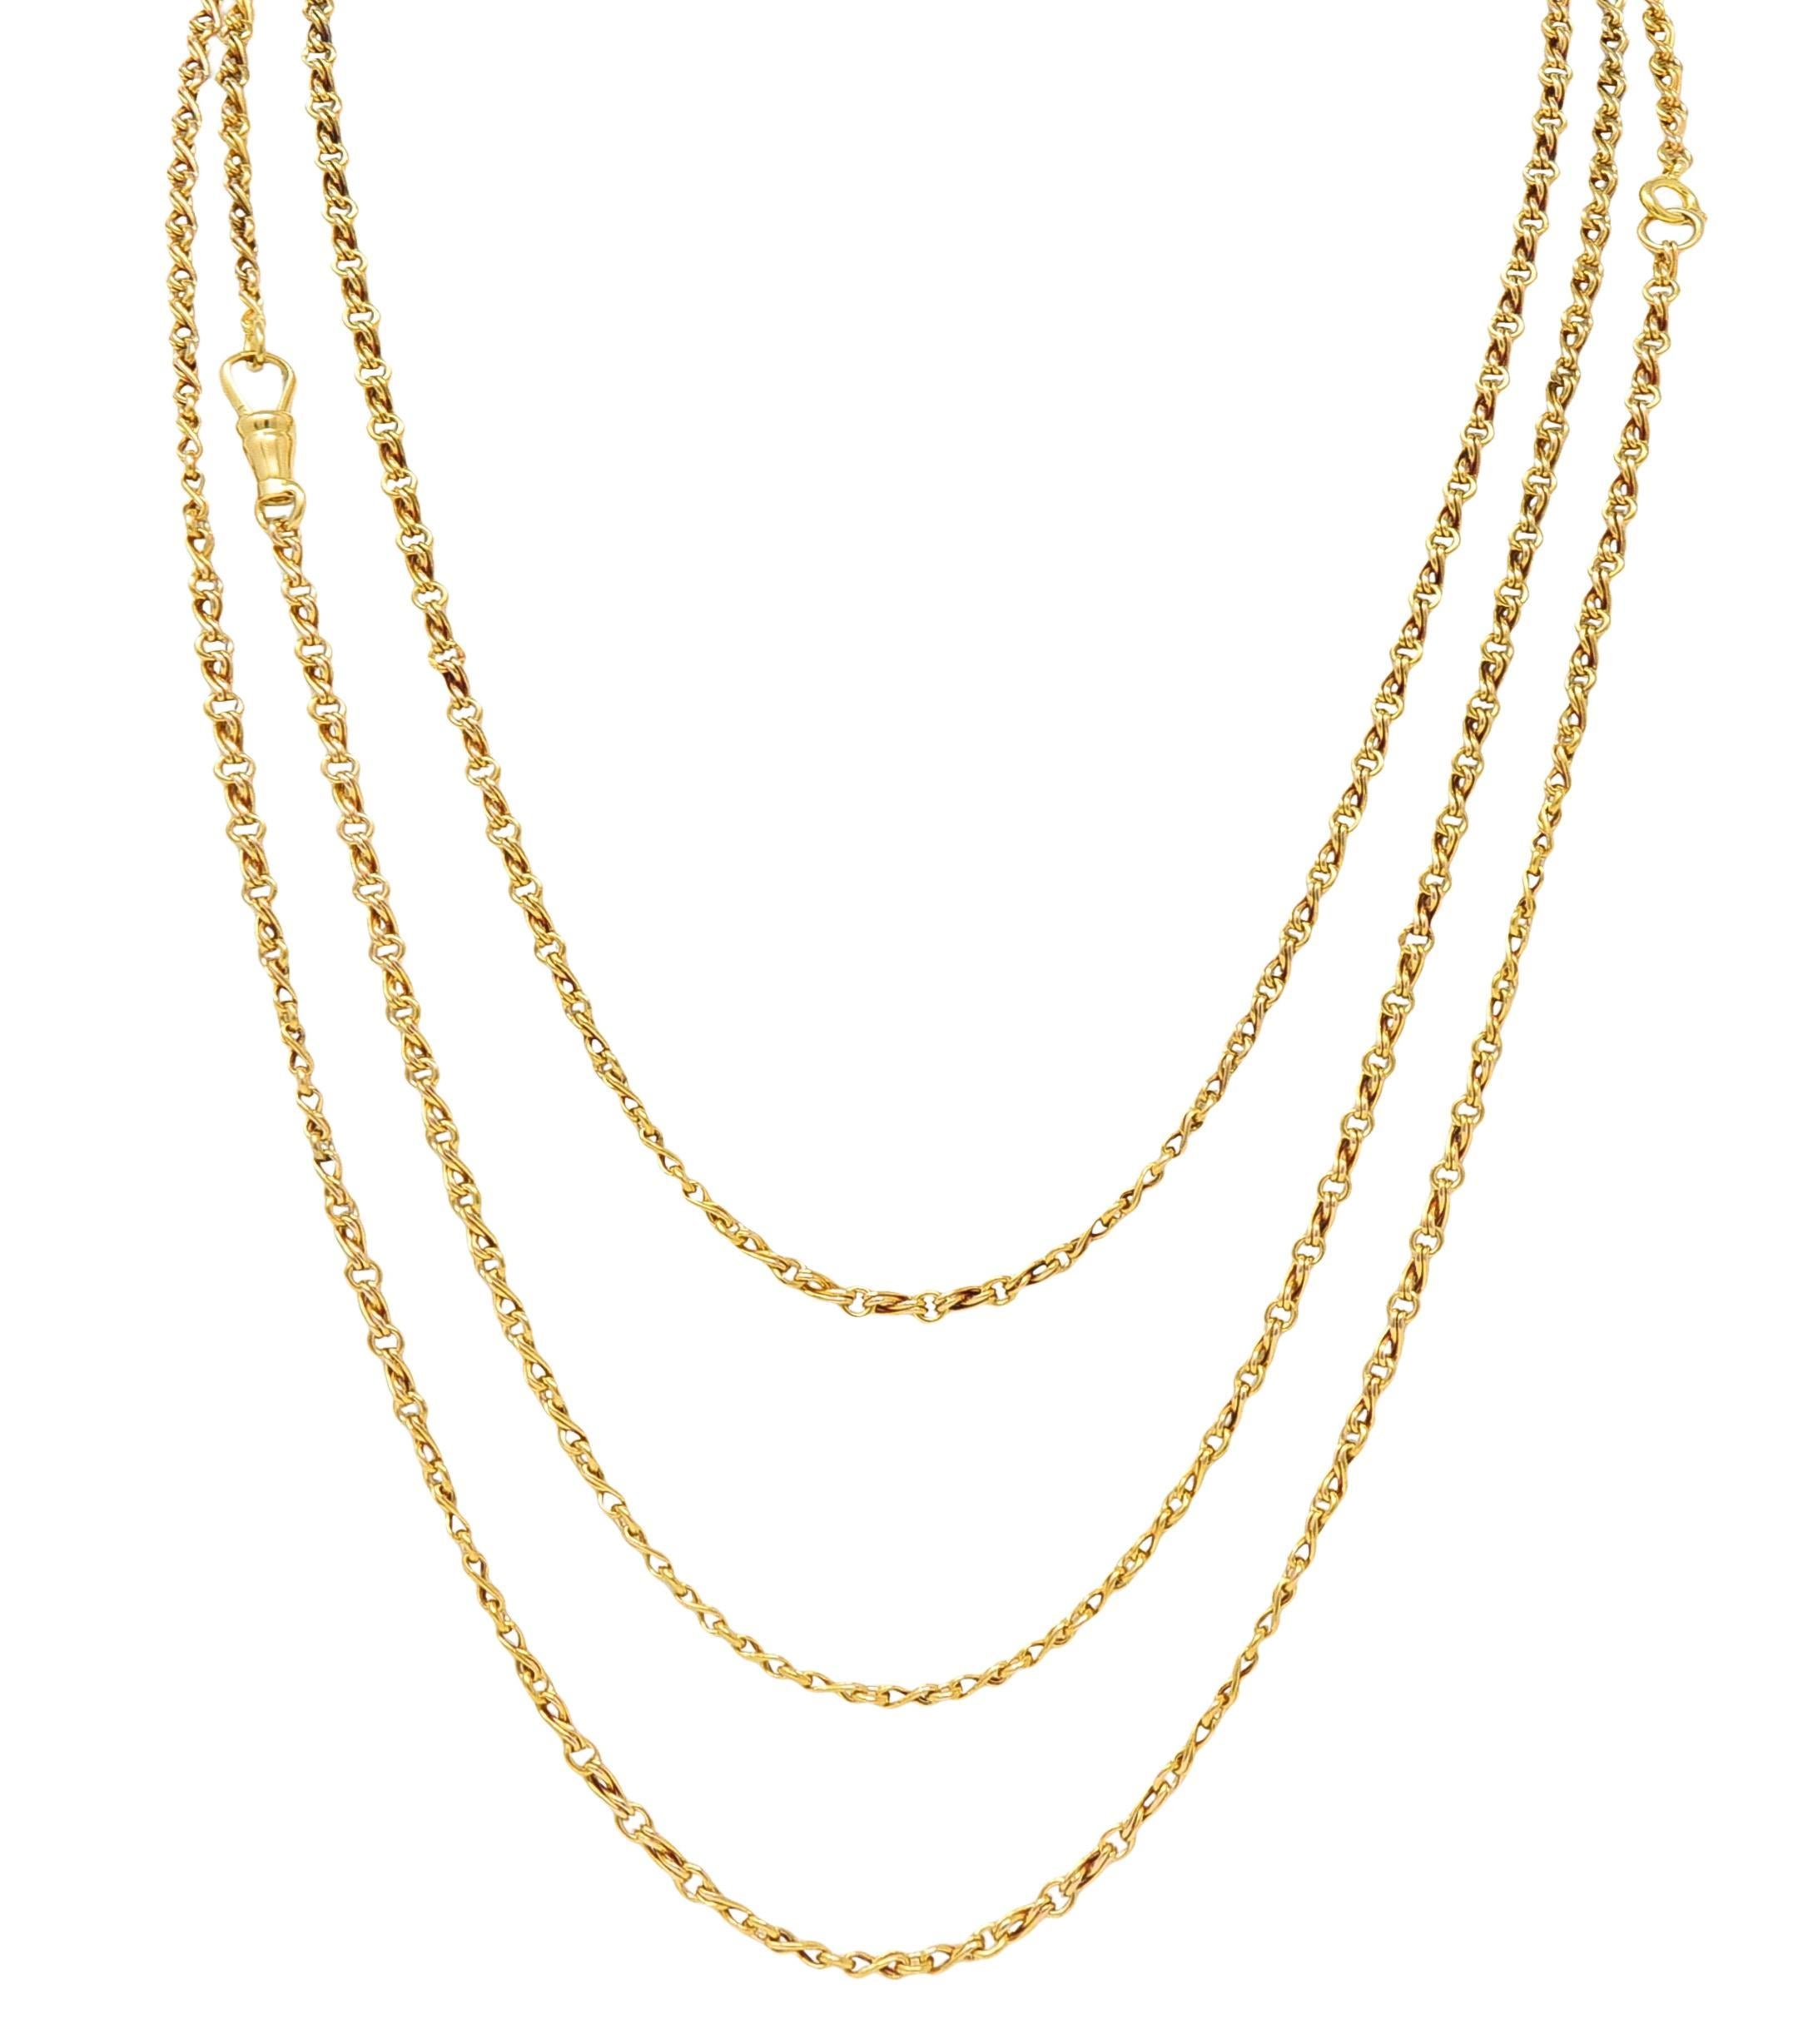 Victorian 18 Karat Yellow Gold Infinity Link 66.5 IN Long Antique Chain Necklace For Sale 5